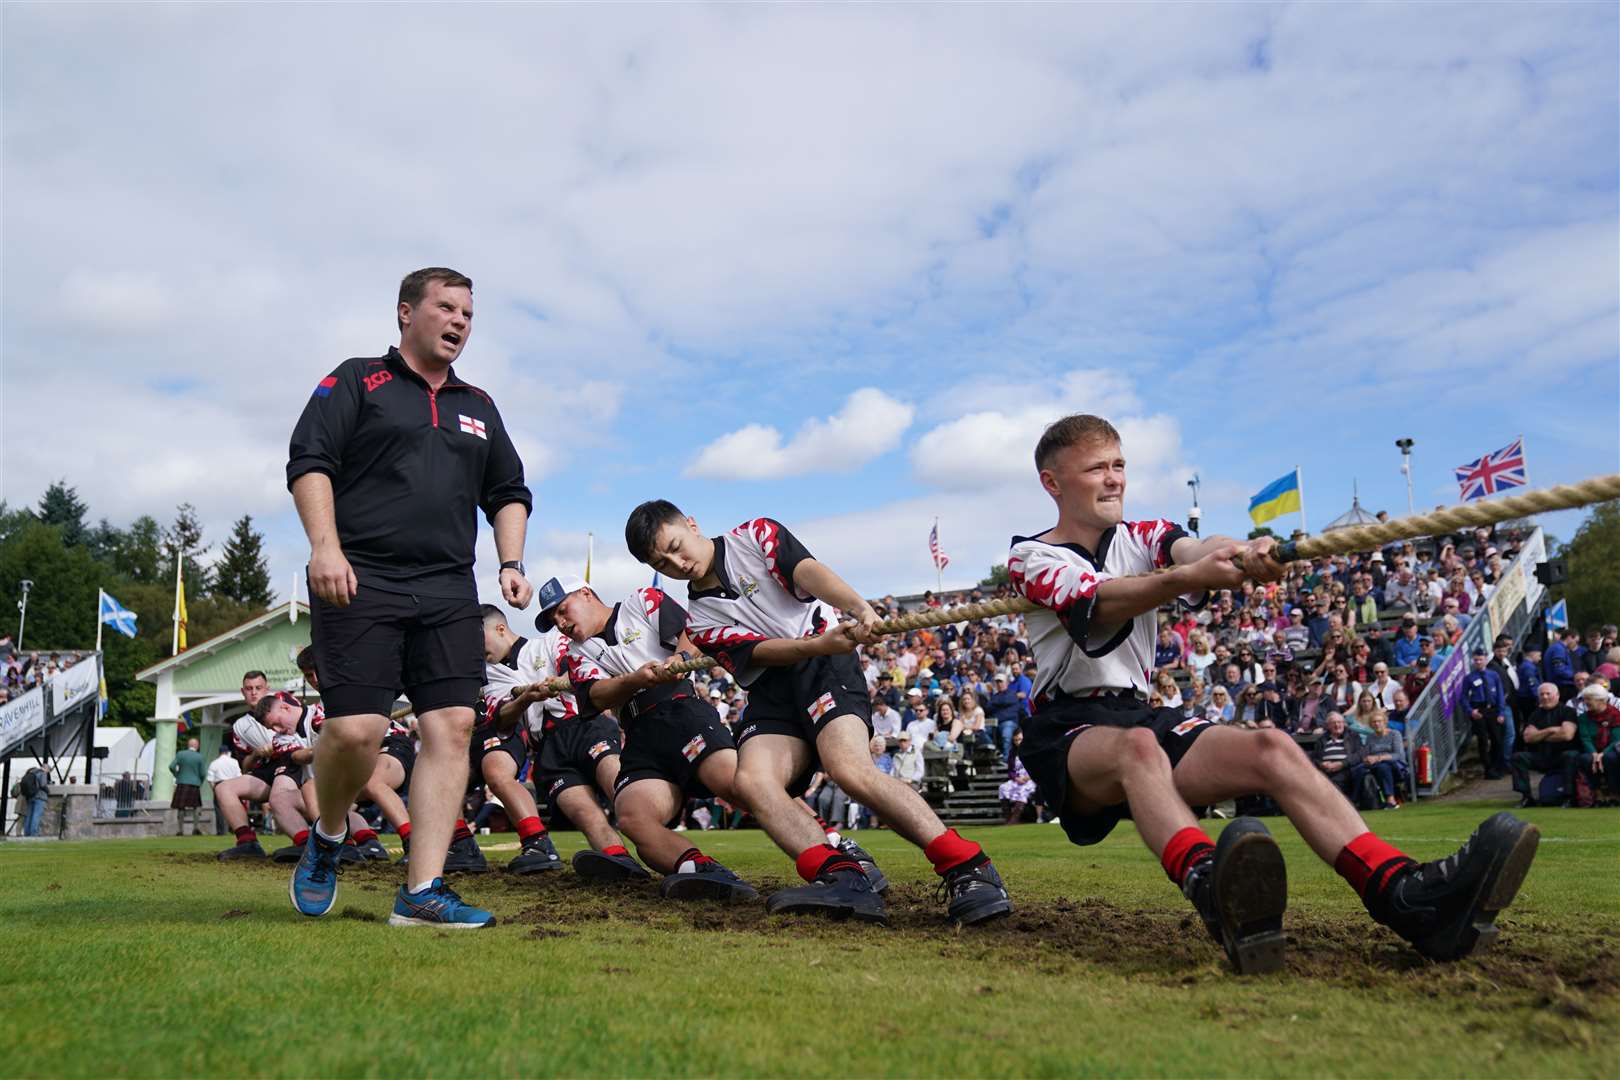 Tug-of-war competitors take the strain (Andrew Milligan/PA)